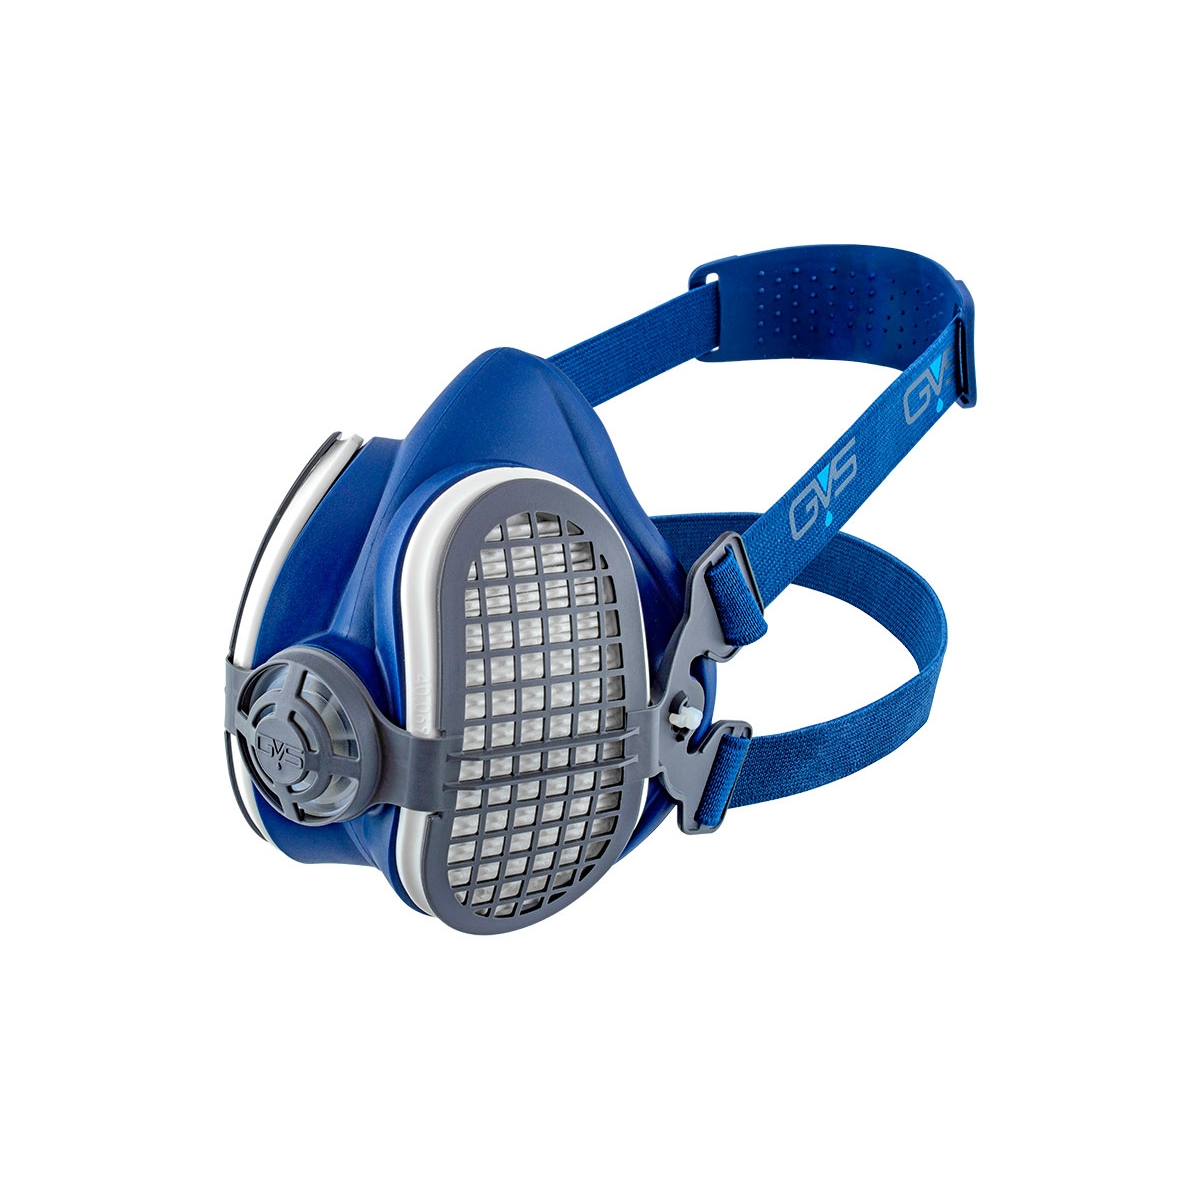 GVS Elipse P2 Respirator with Replacement Filters